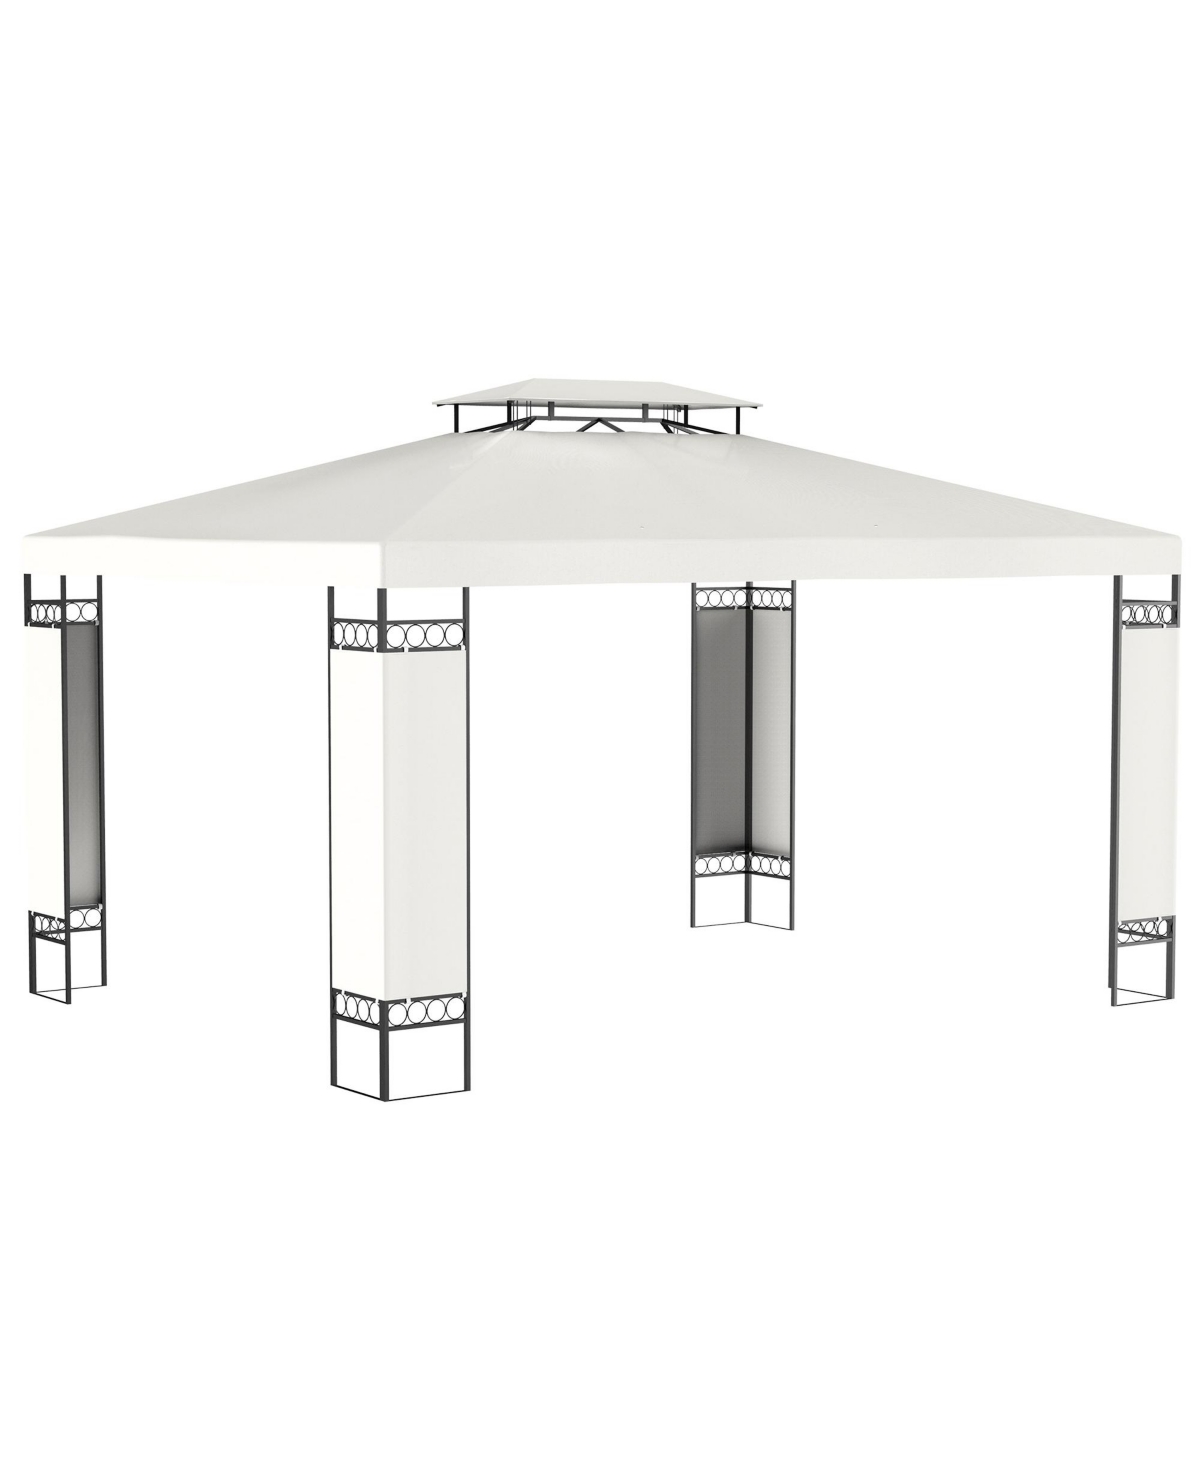 13' x 10' Patio Gazebo Outdoor Canopy Shelter with Double Vented Roof, Steel Frame for Lawn Backyard and Deck, Cream White - White